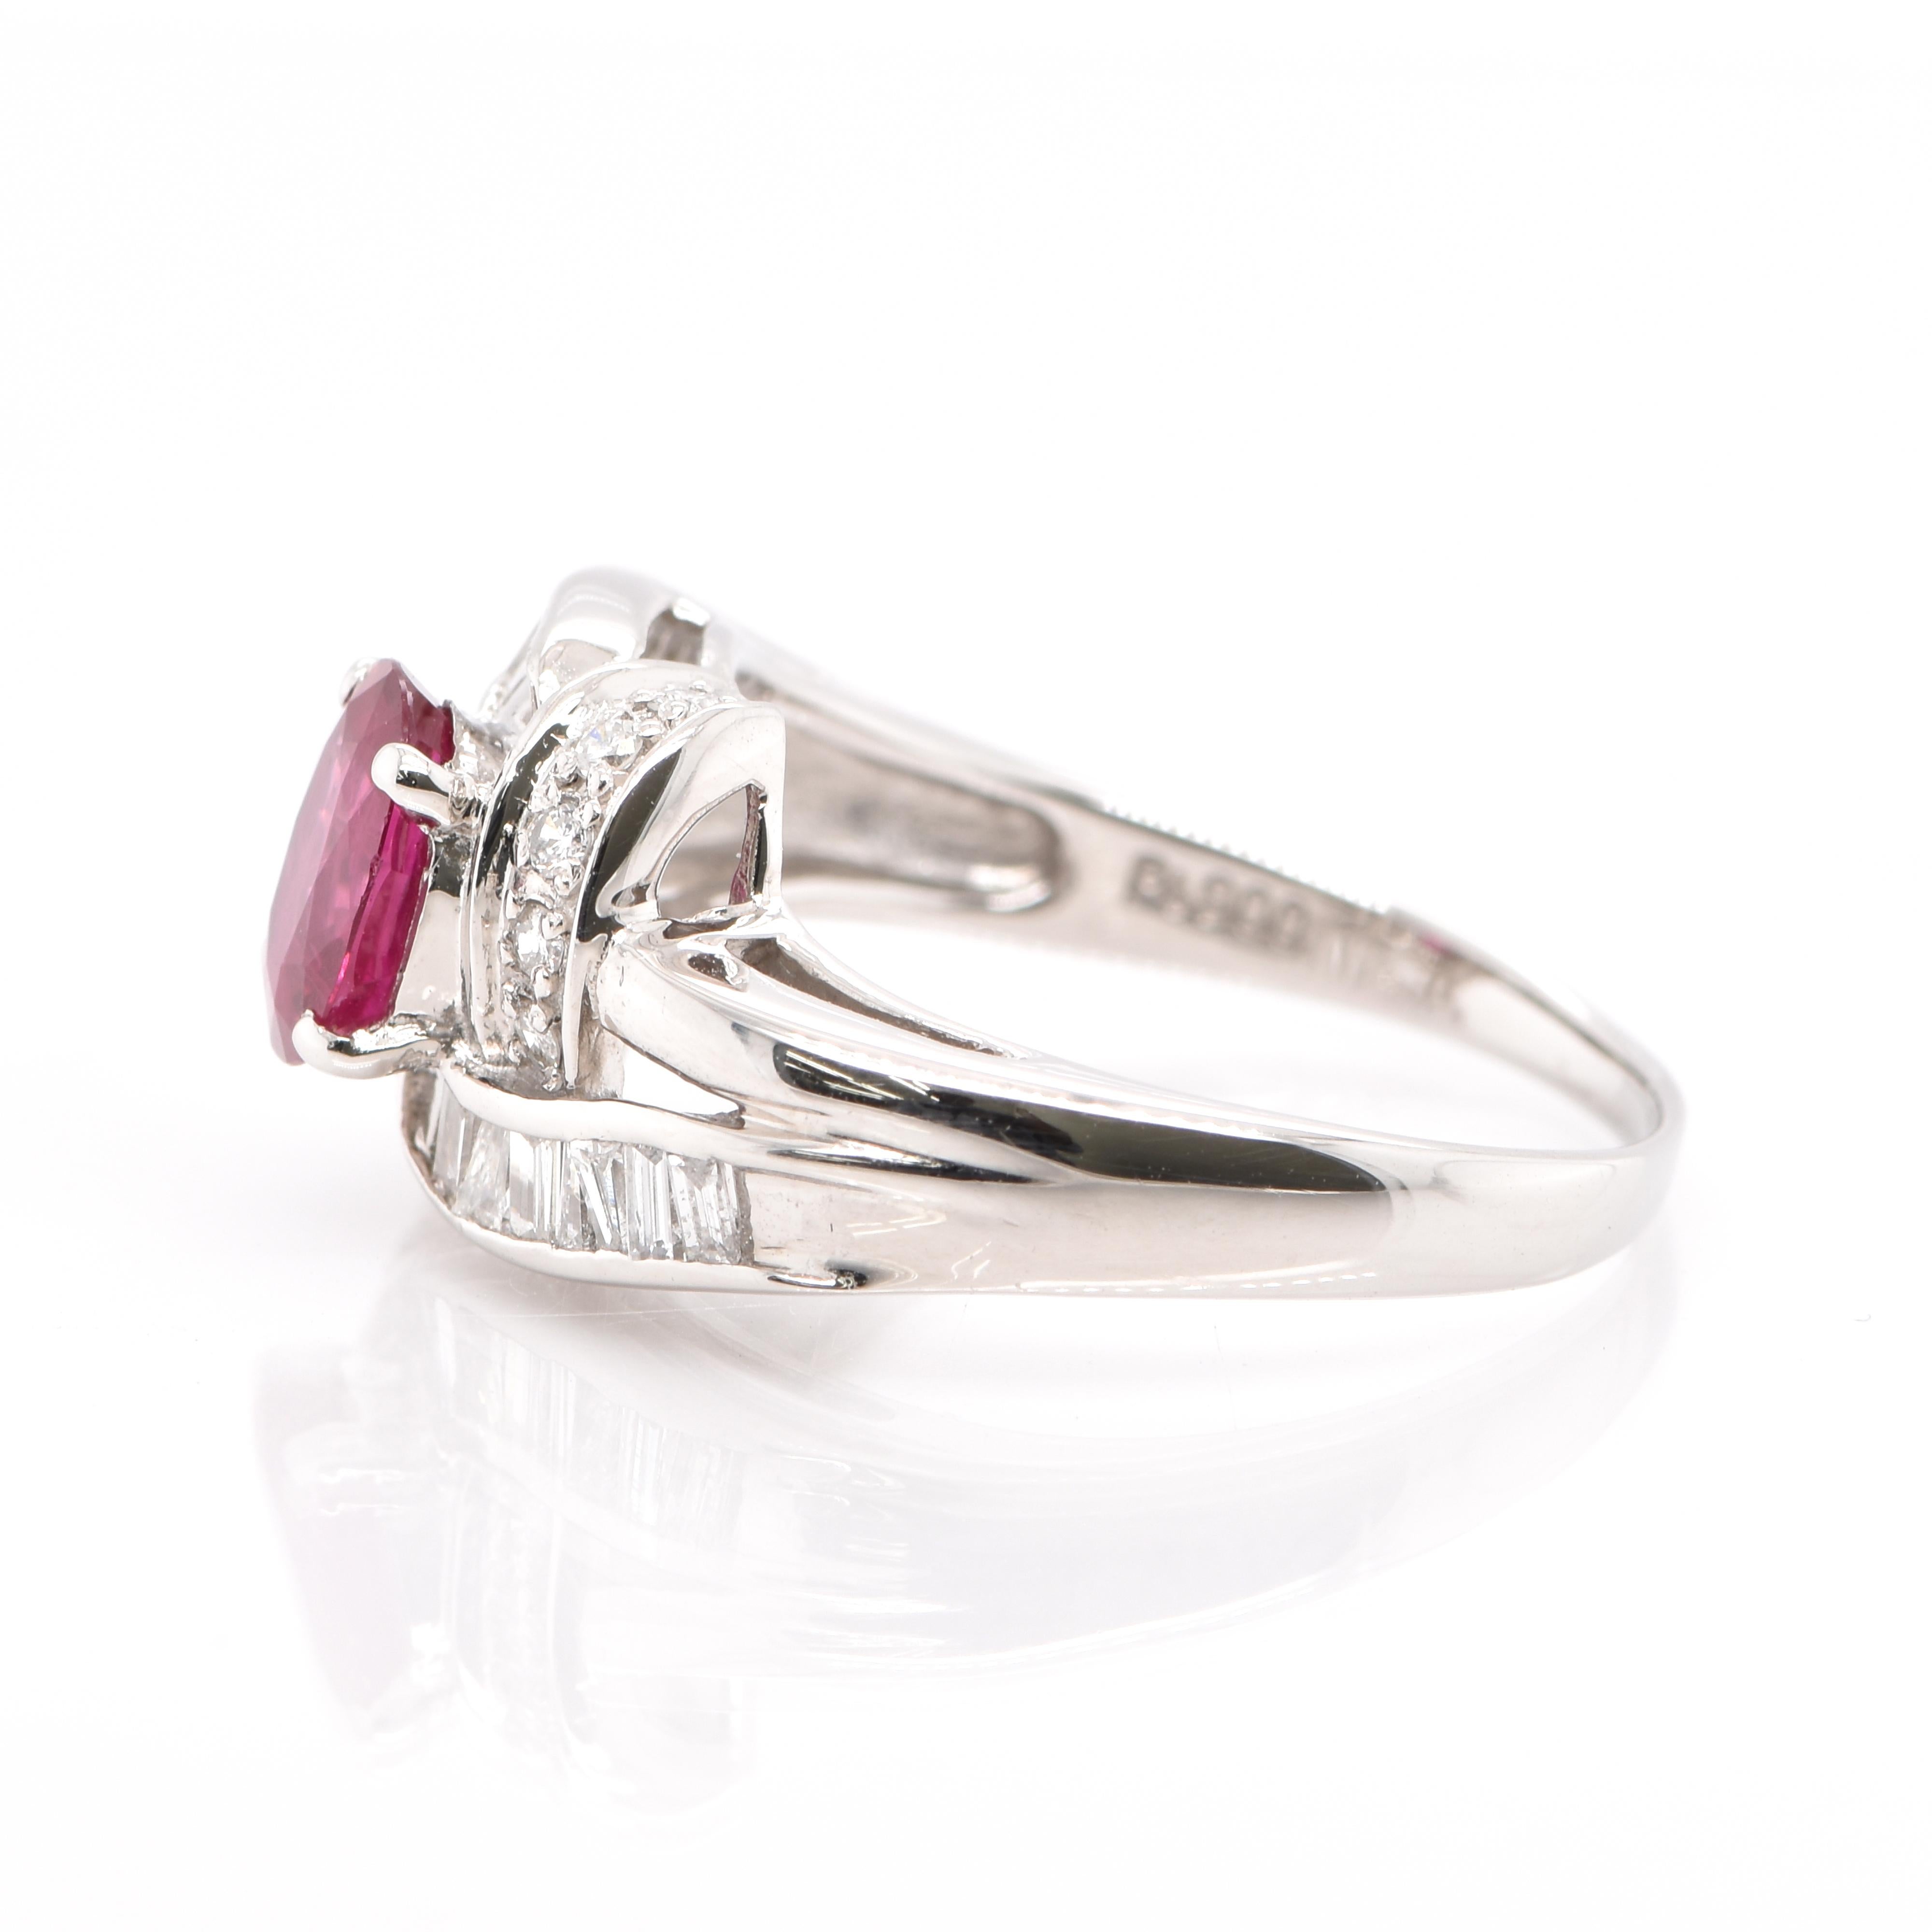 Oval Cut 1.00 Carat Natural Ruby and Diamond Ring Set in Platinum